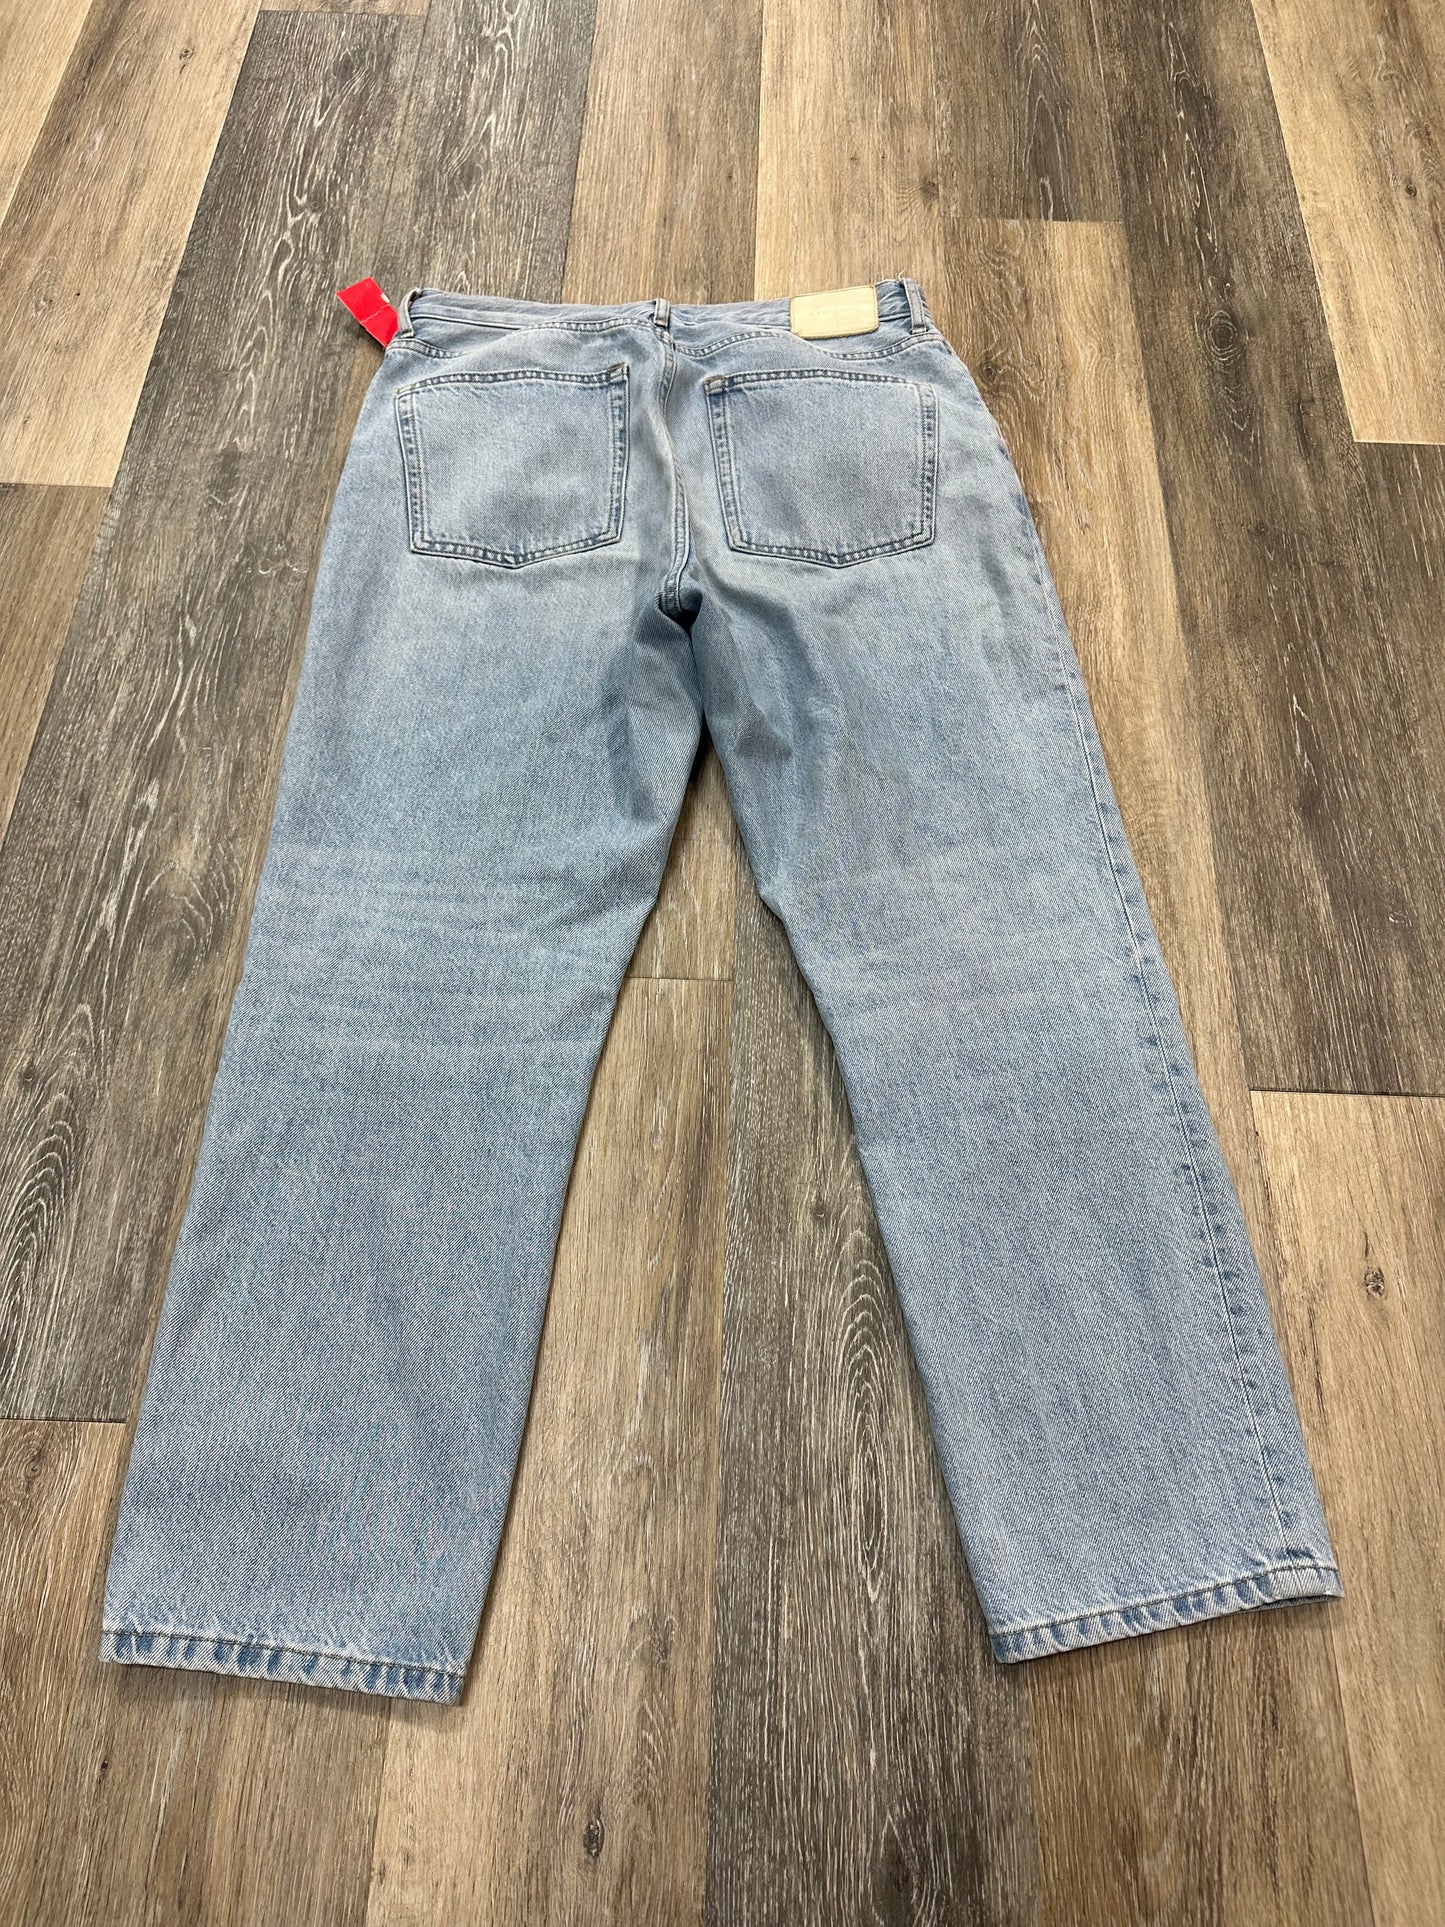 Jeans Cropped By Everlane  Size: 10